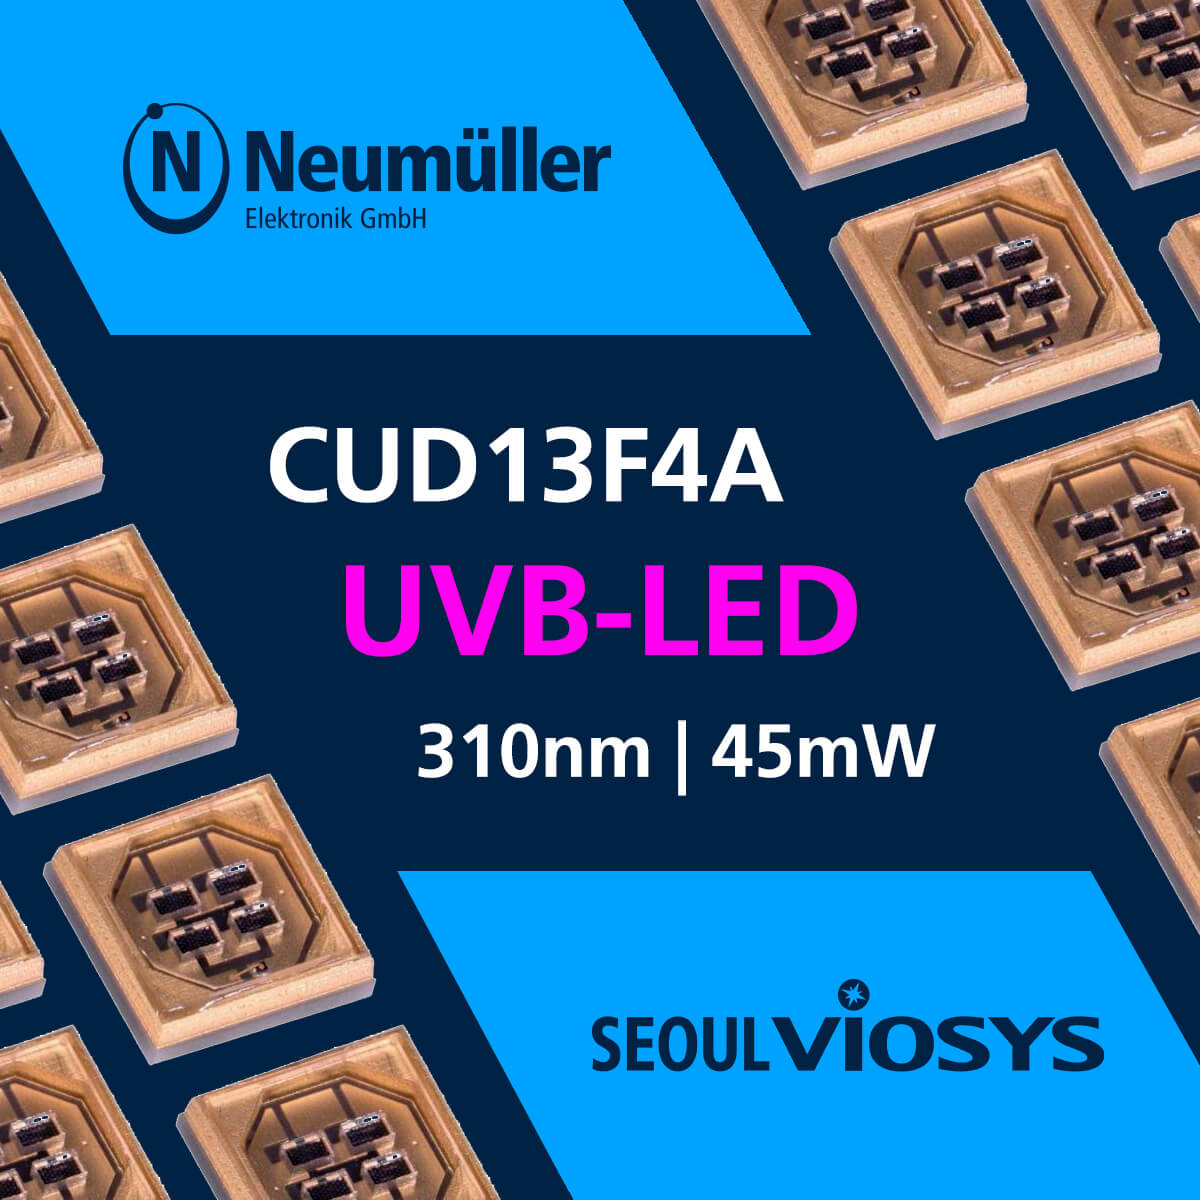 CUD13F4A - New 310nm UVB LED from Seoulviosys